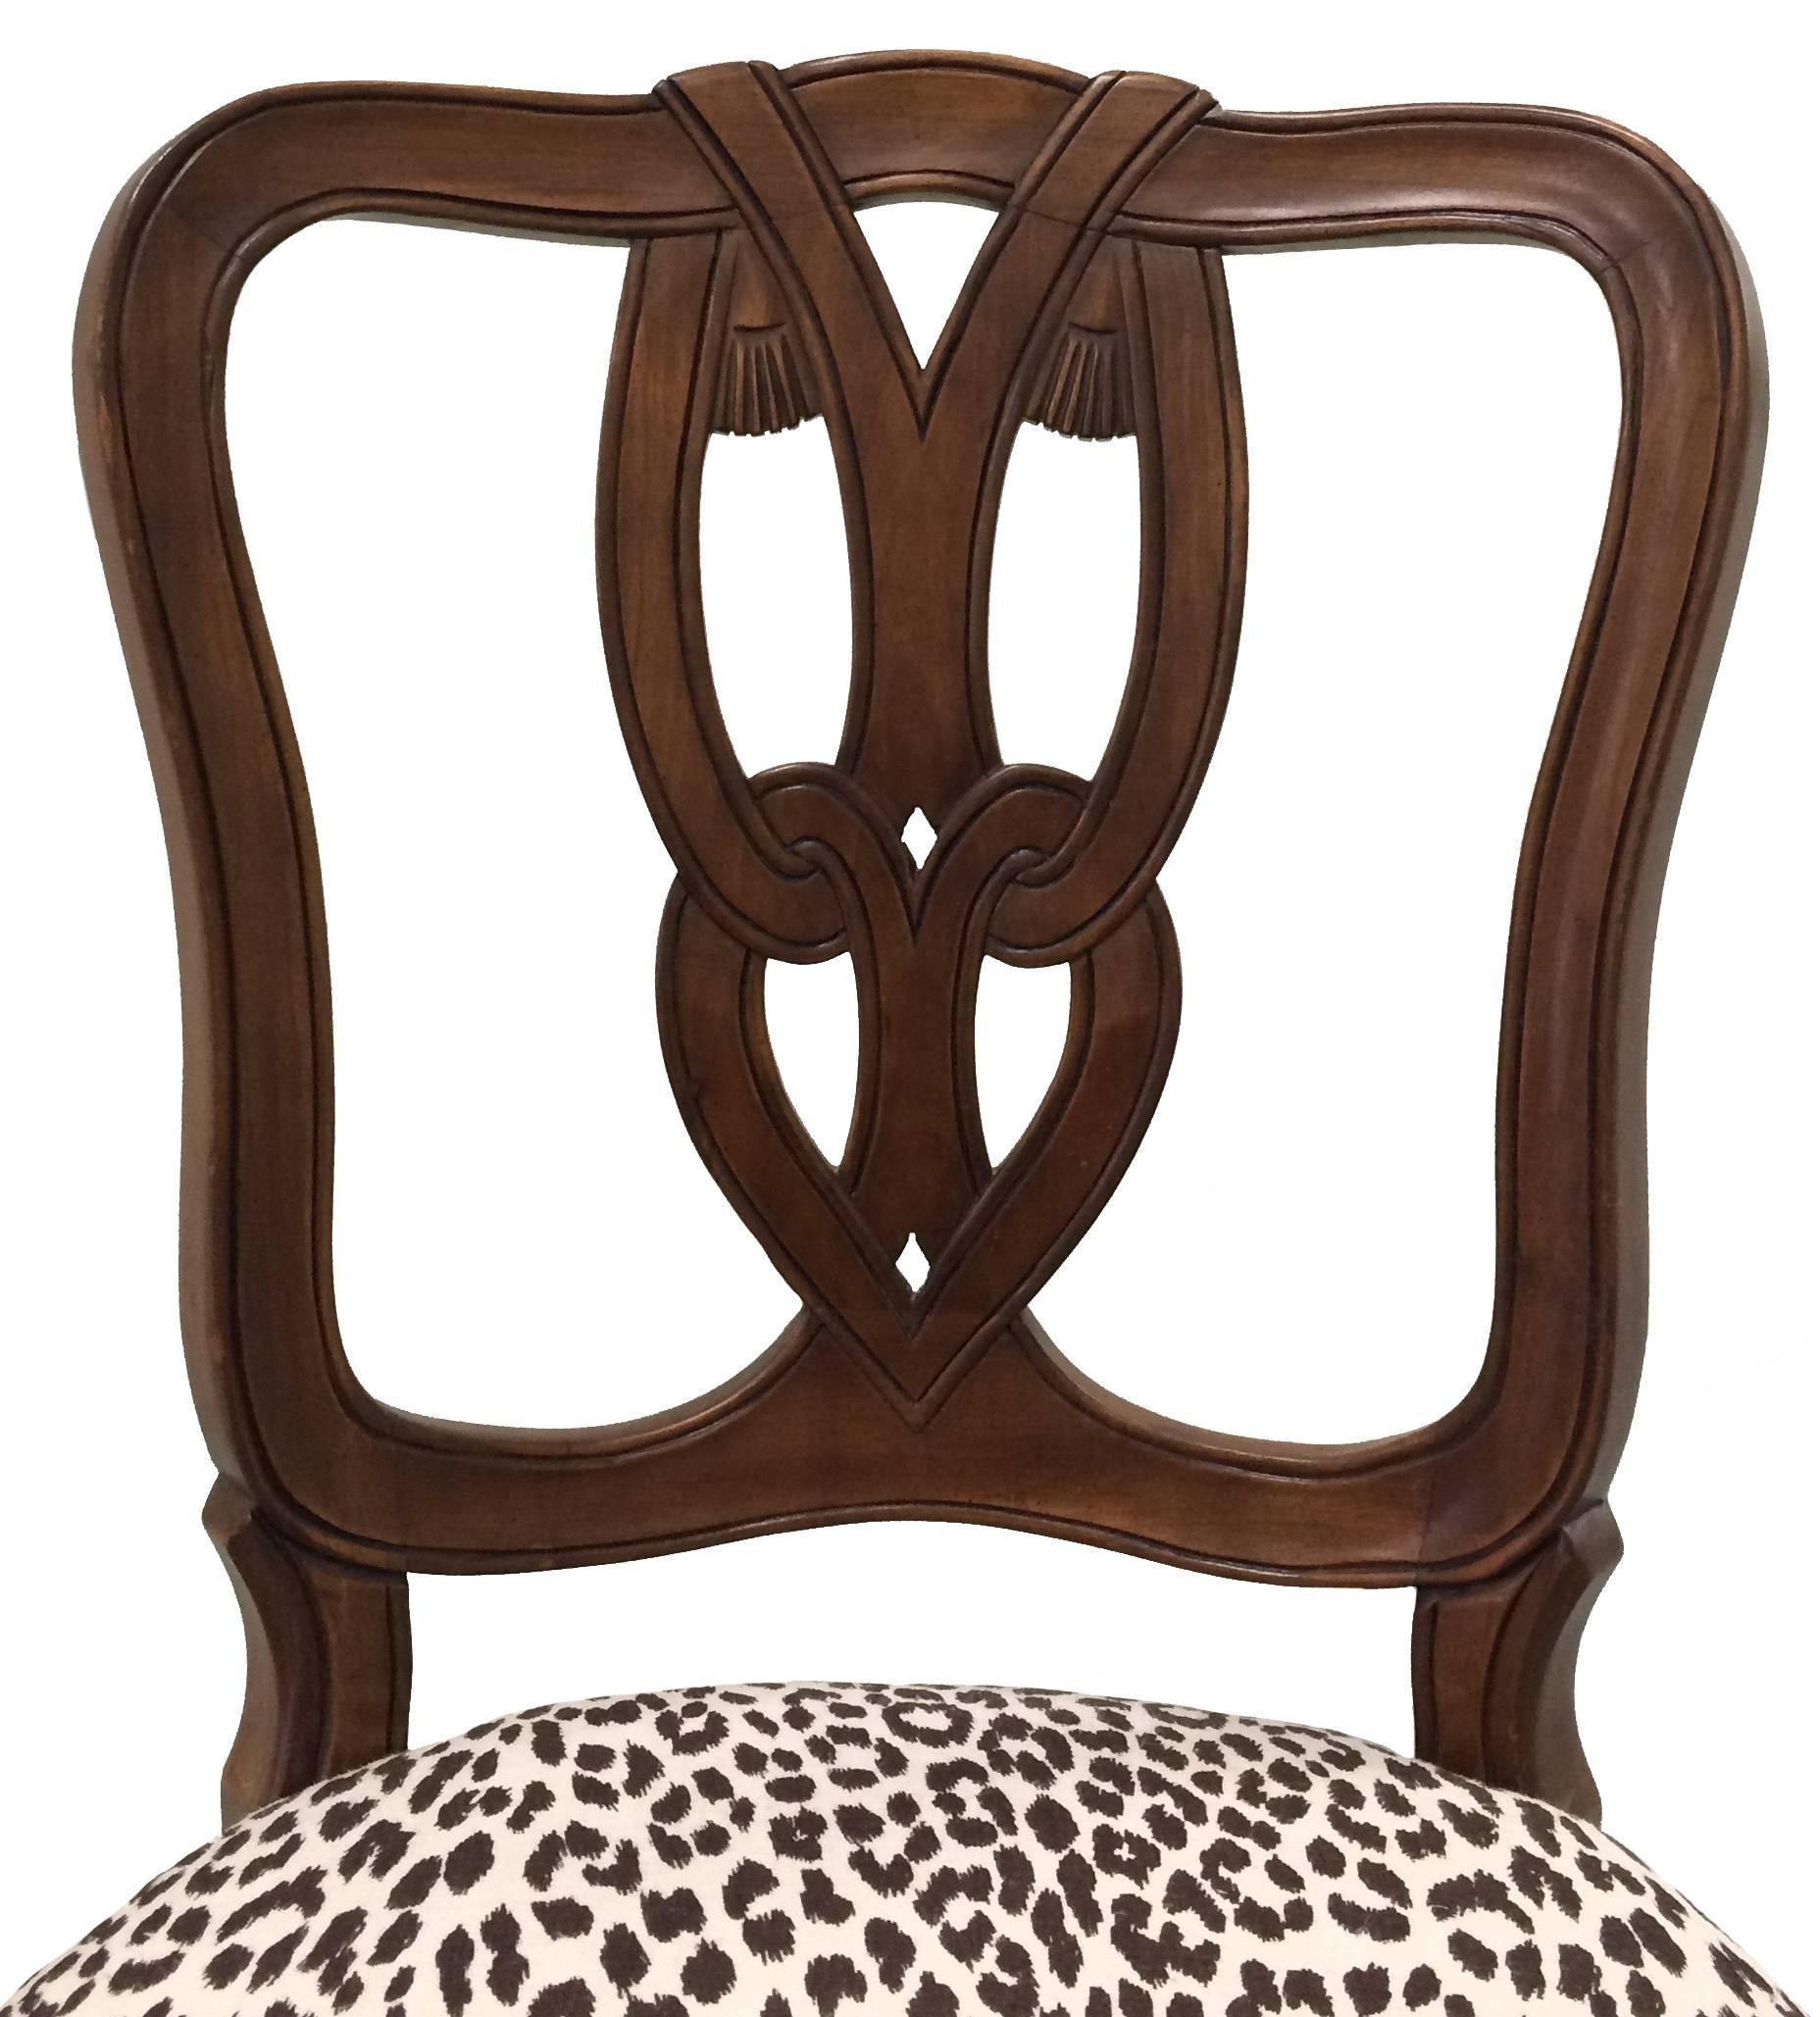 Pair of Hollywood Regency style chairs by Kindel Furniture. As found brown stained finish with carved tassel detailing. Newly upholstered in Raoul Textiles 'Leopard' linen in brown and cream. Measures: Seat 18